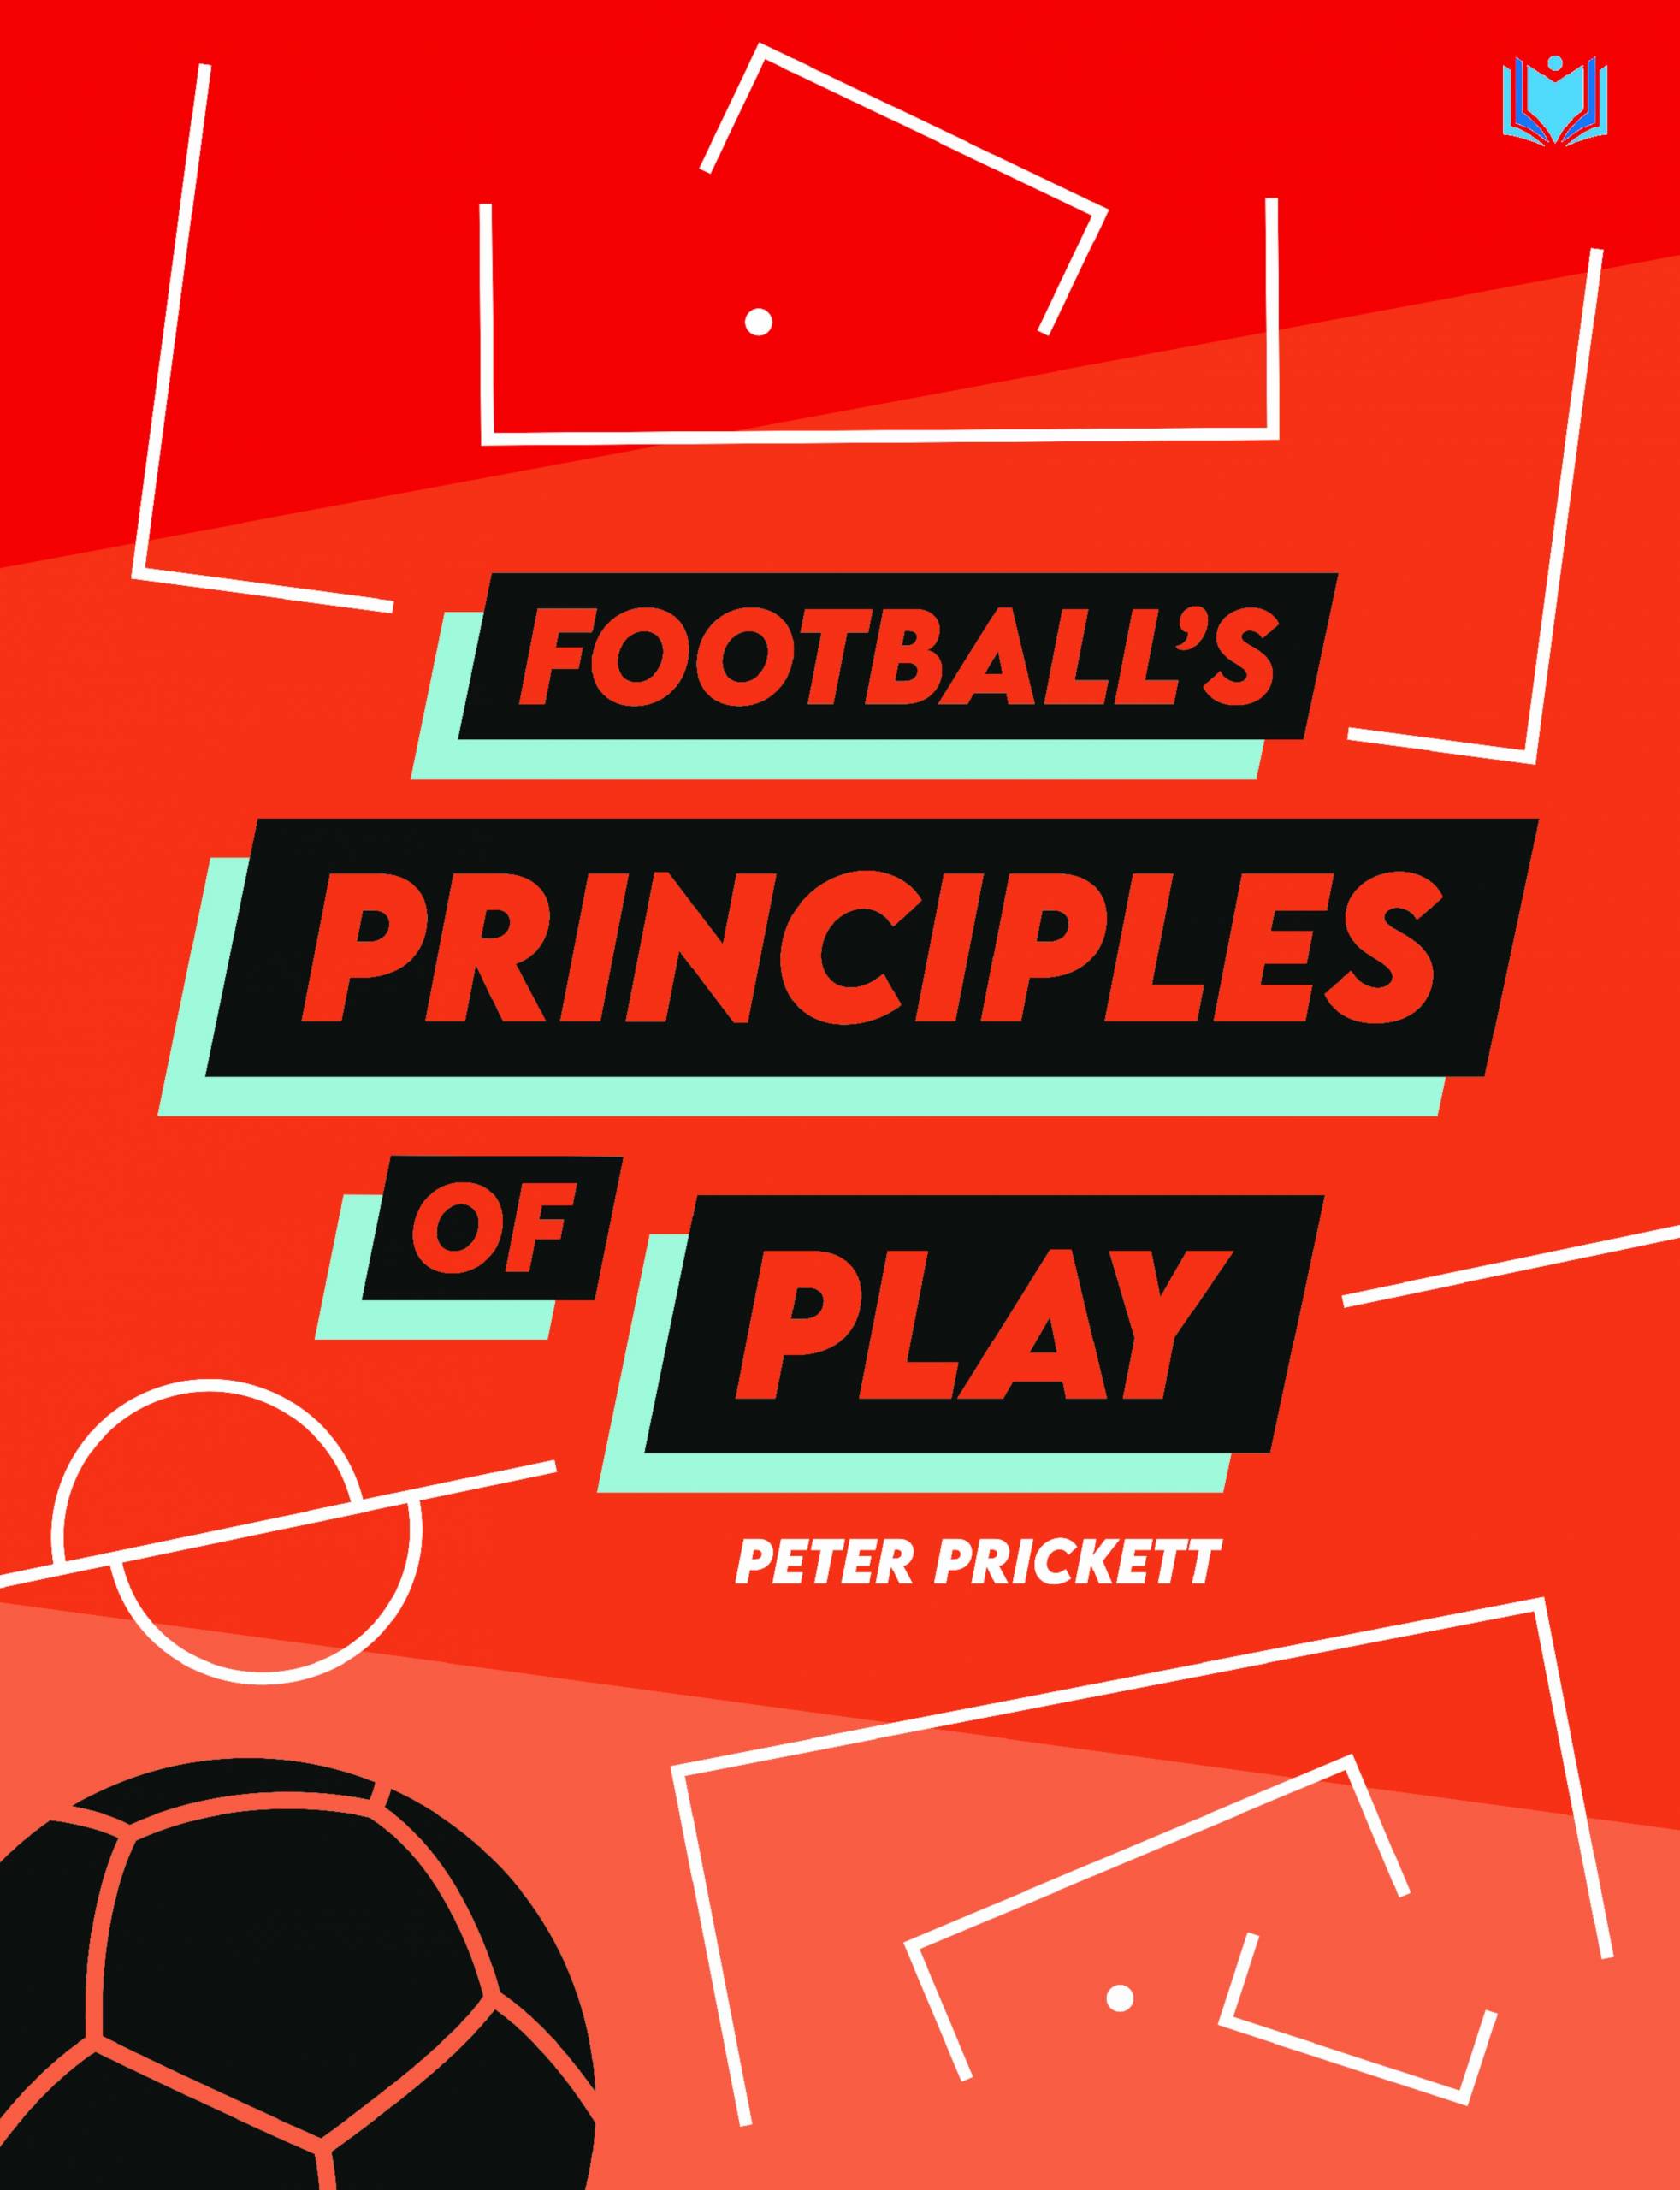 Football’s Principles of Play by Peter Prickett